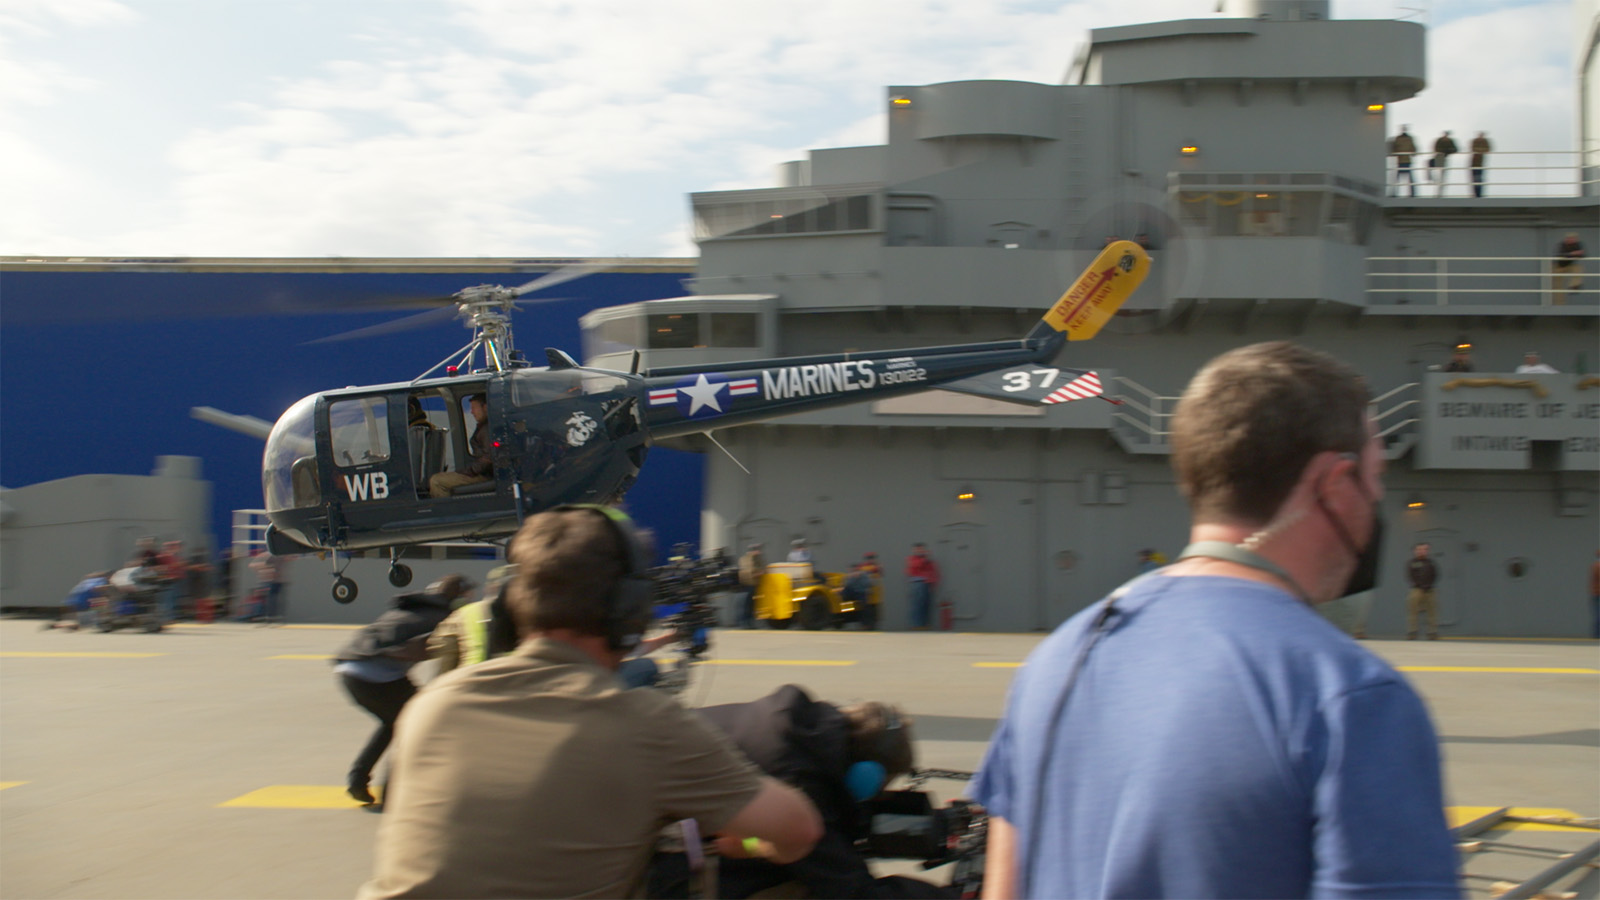 On location in Georgia with a replica of the USS Leyte’s bridge in the background and a Sikorsky HO5S taking off in the foreground. Image © Sony Pictures Entertainment